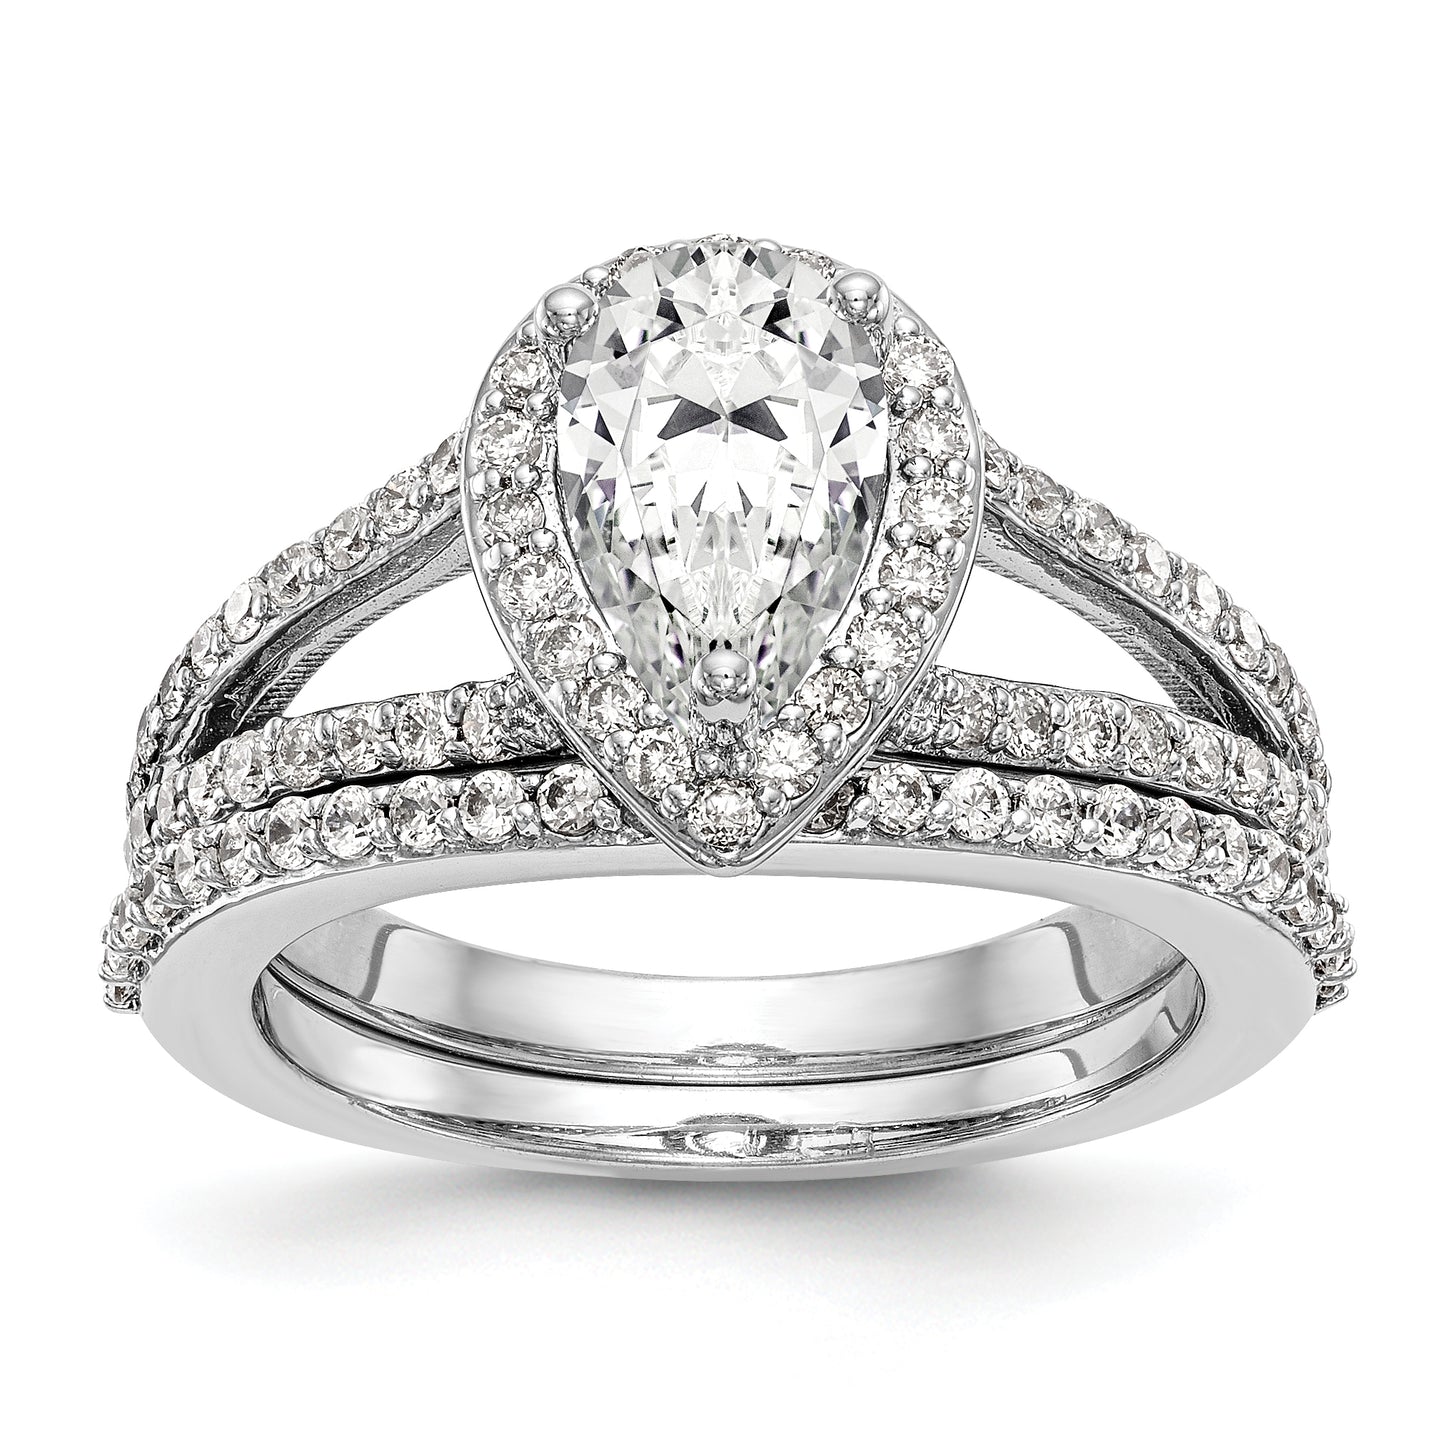 14K White Gold Diamond Pear CZ Pear Halo Engagement Ring